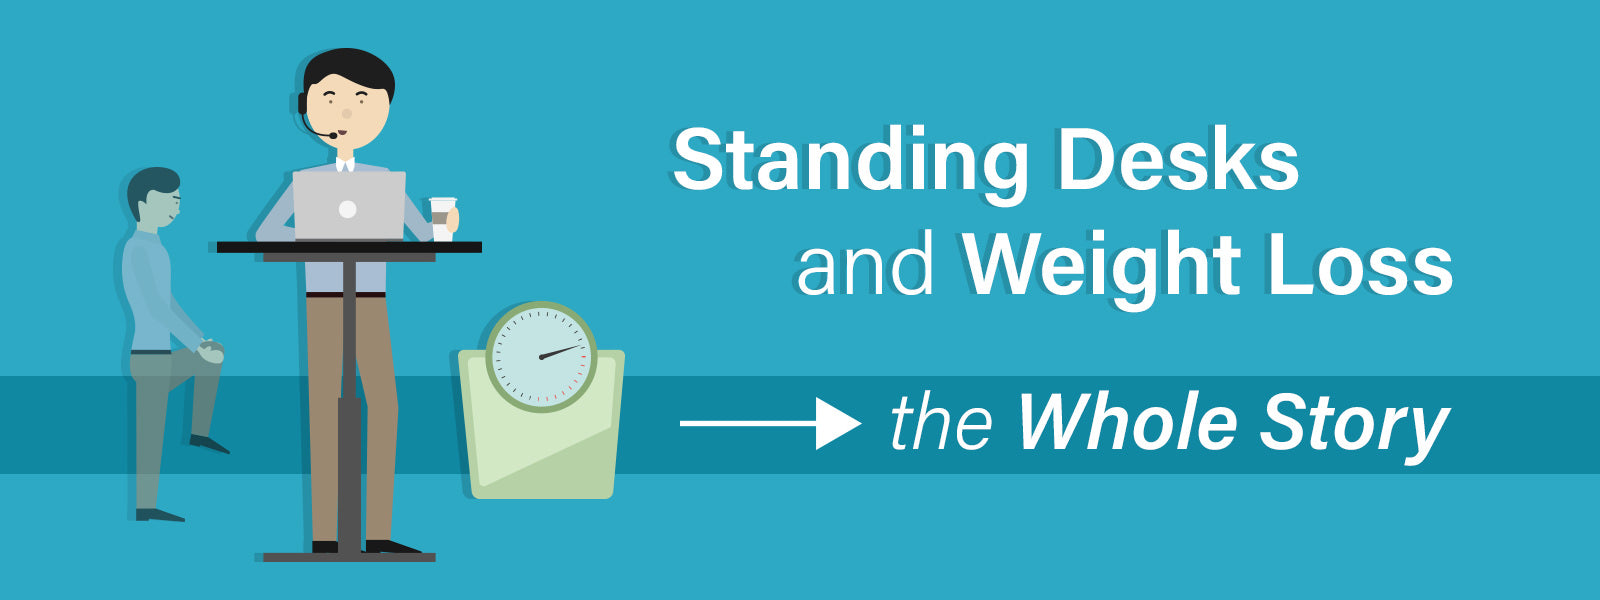 Standing Desks and Weight Loss